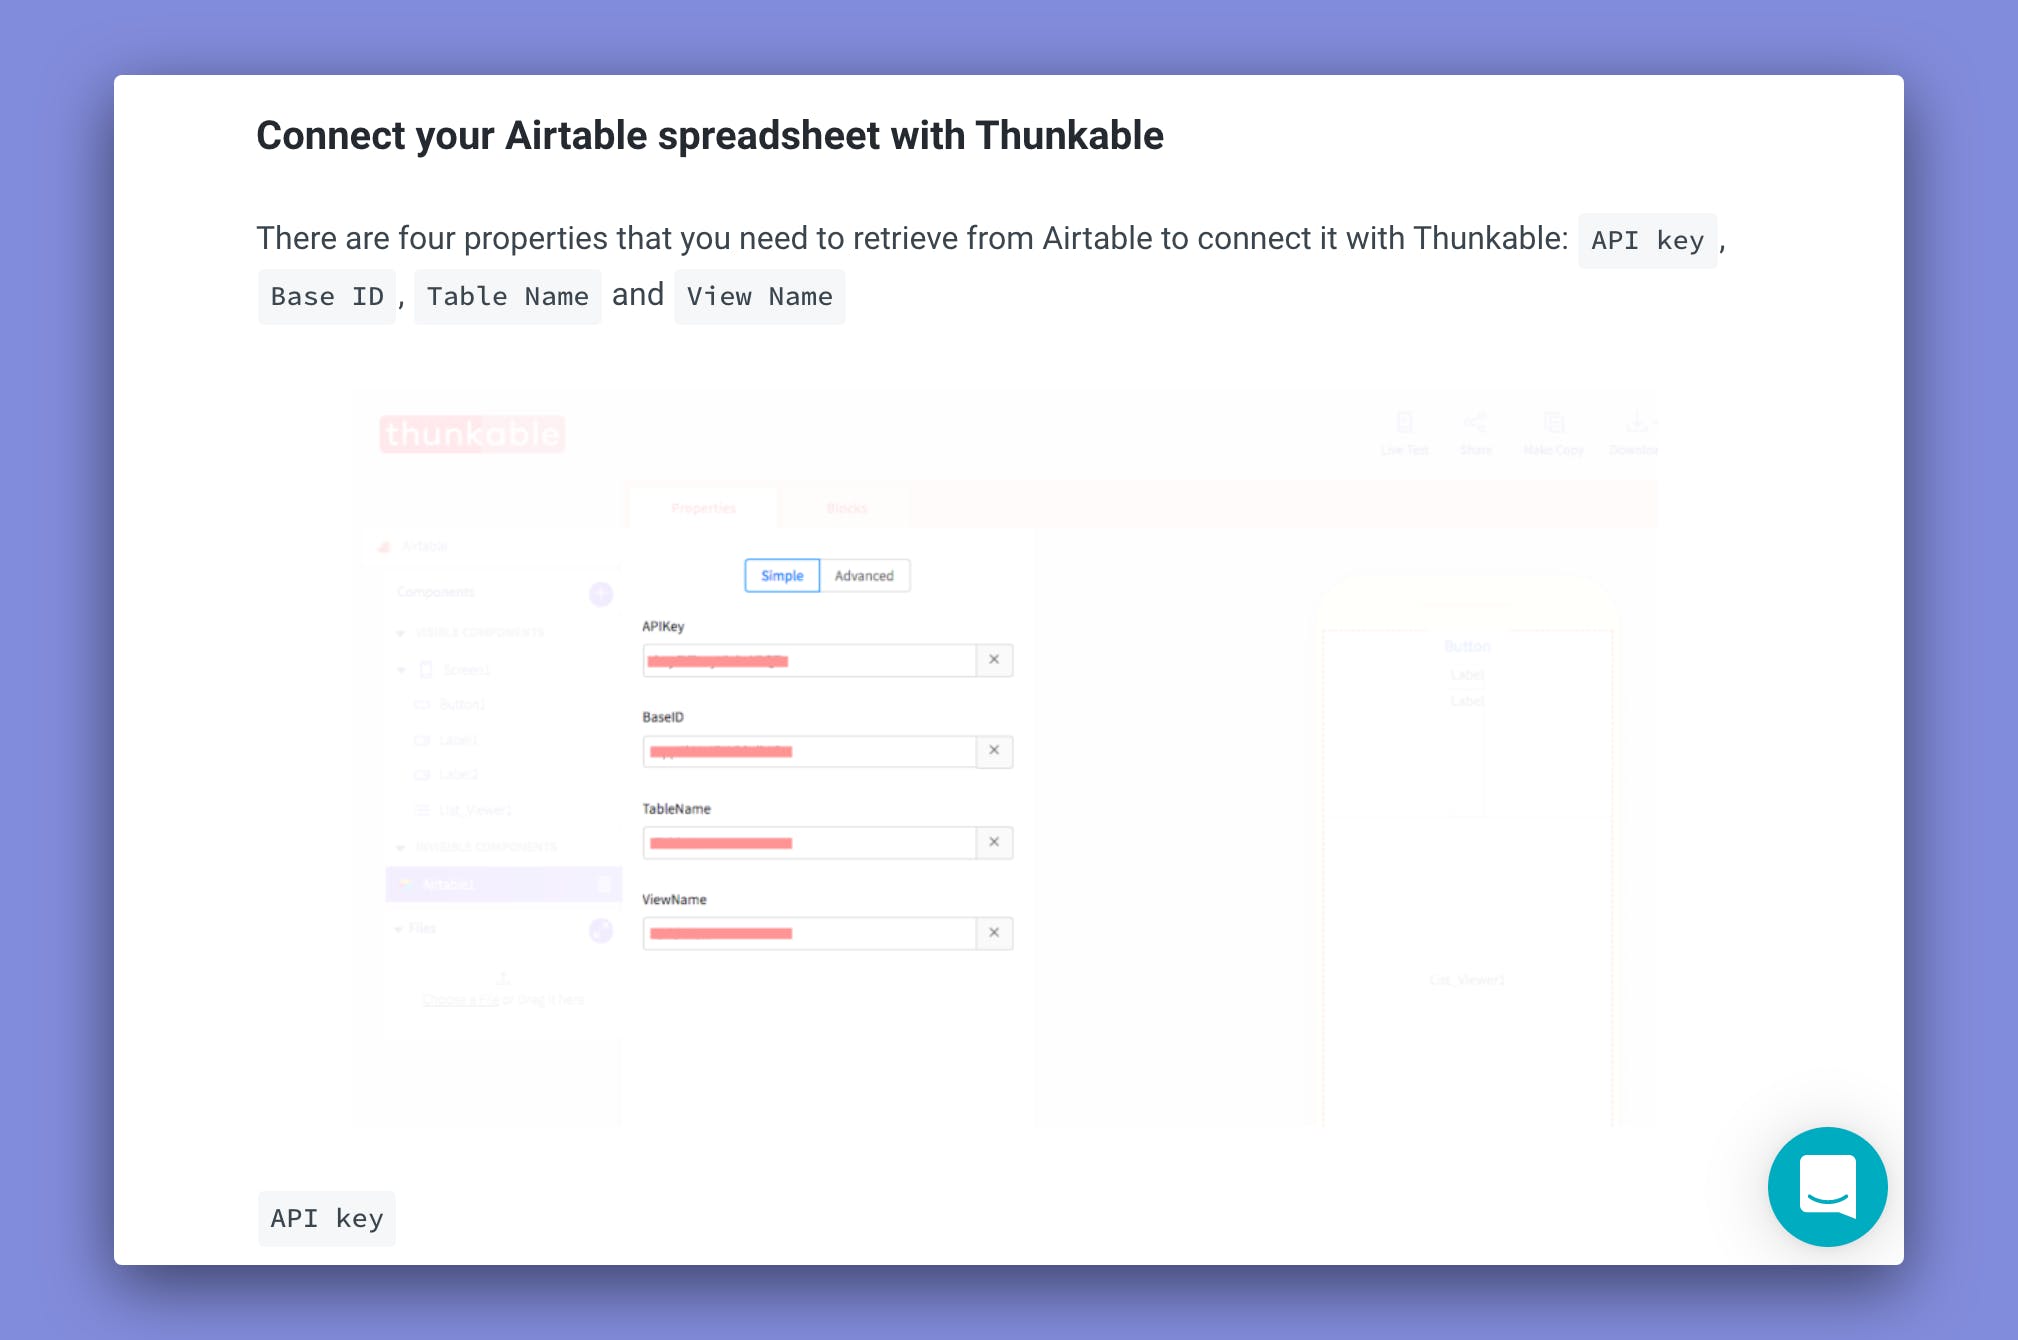 Documentation for connecting Airtable to Thunkable.